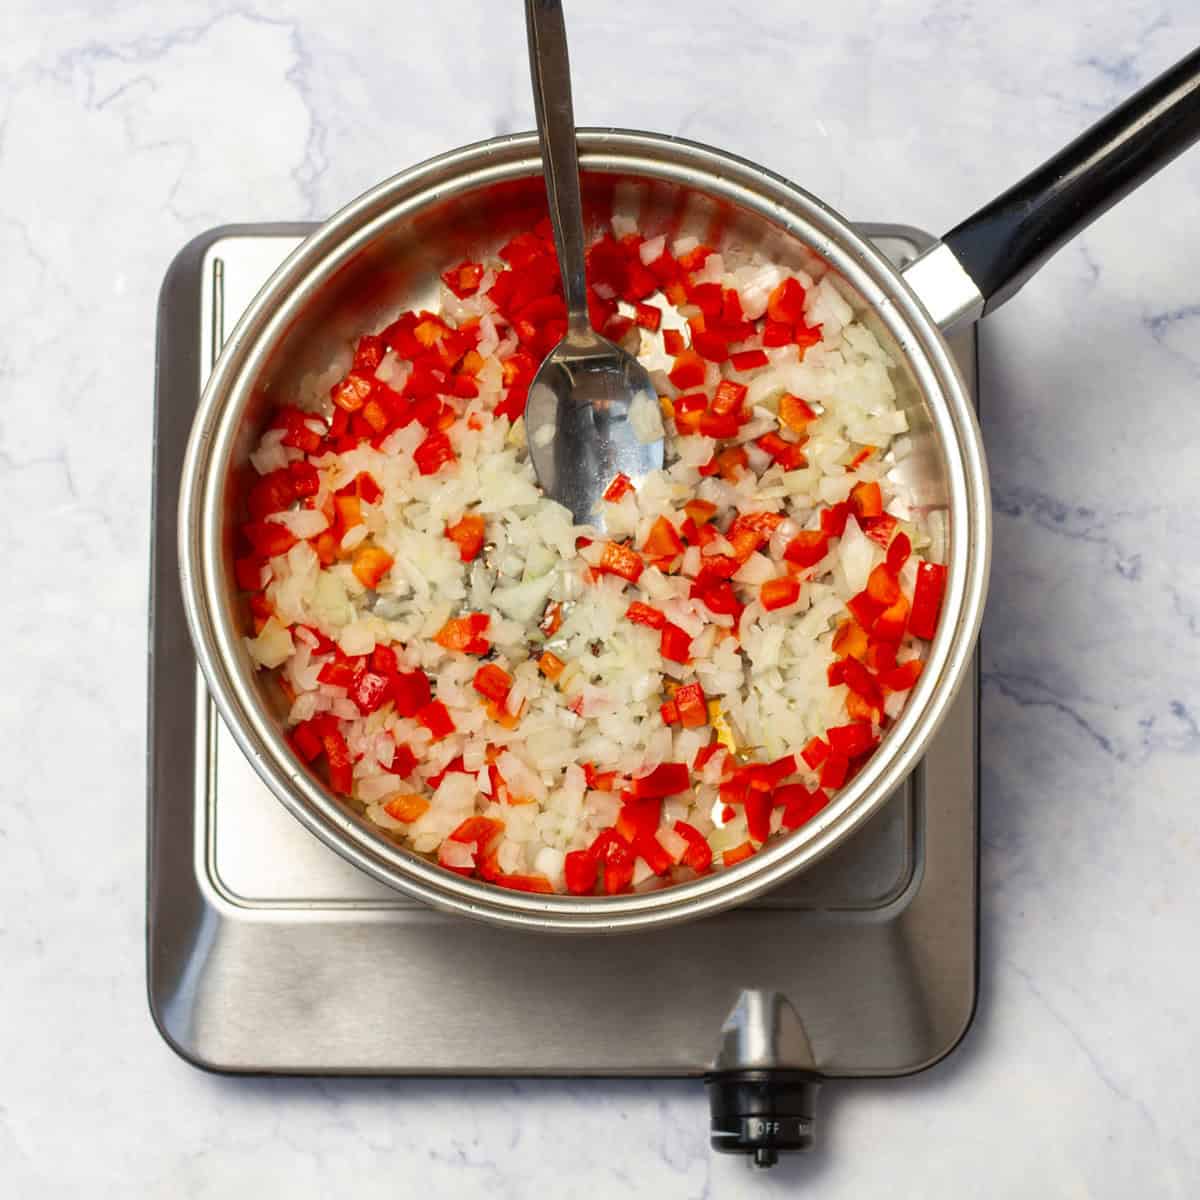 chopped onion and diced red bell pepper in skillet